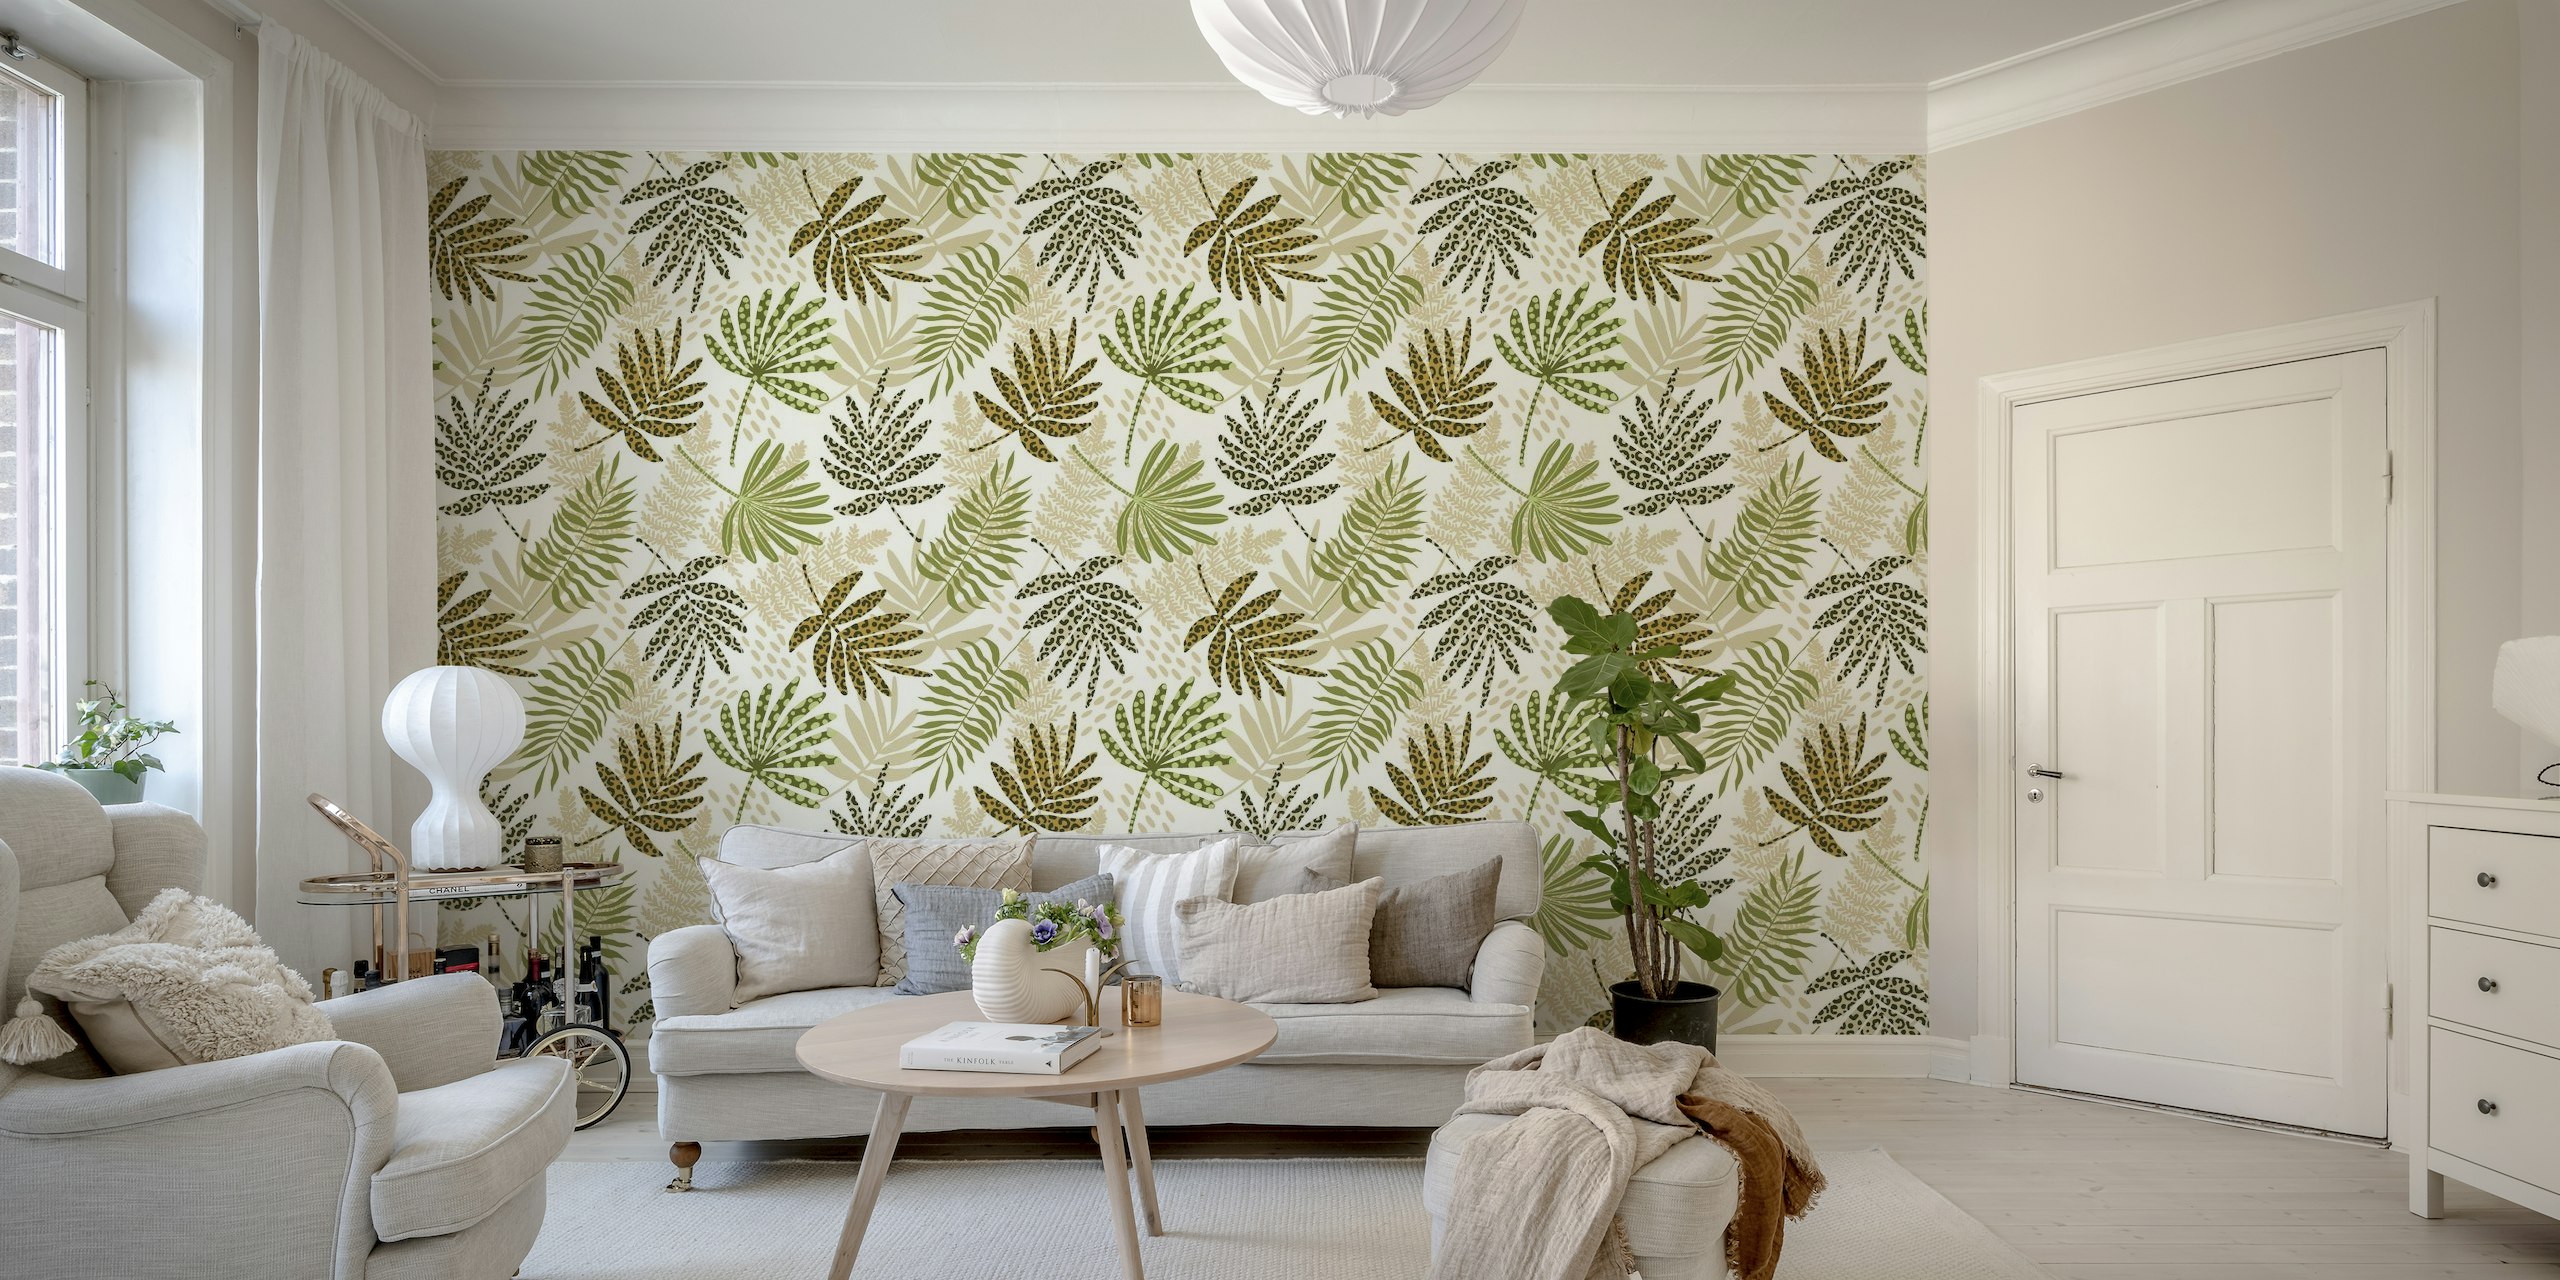 Animal printed tropical leaves wall mural, featuring green foliage with animal patterns